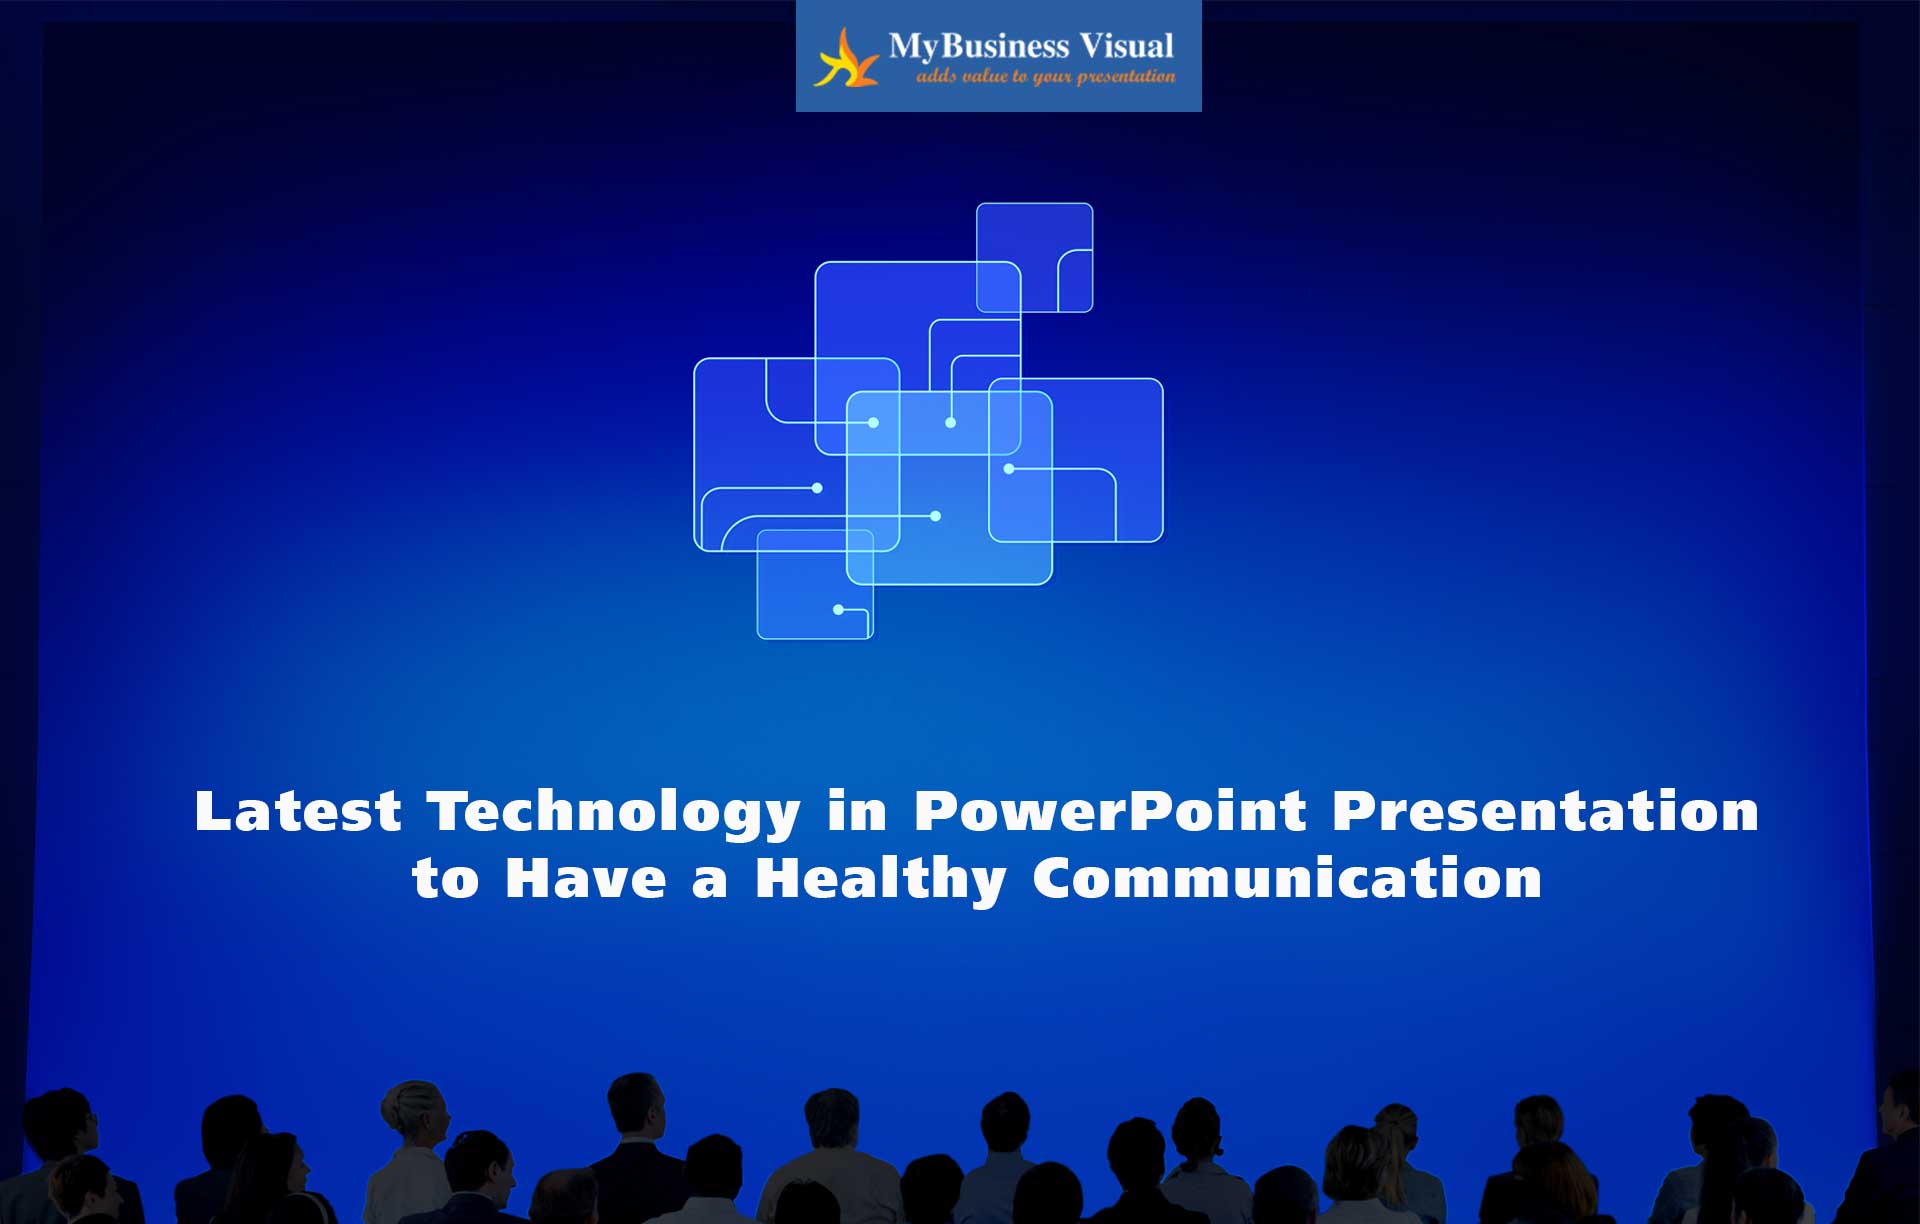 Latest technology in PowerPoint presentation to have a healthy communication